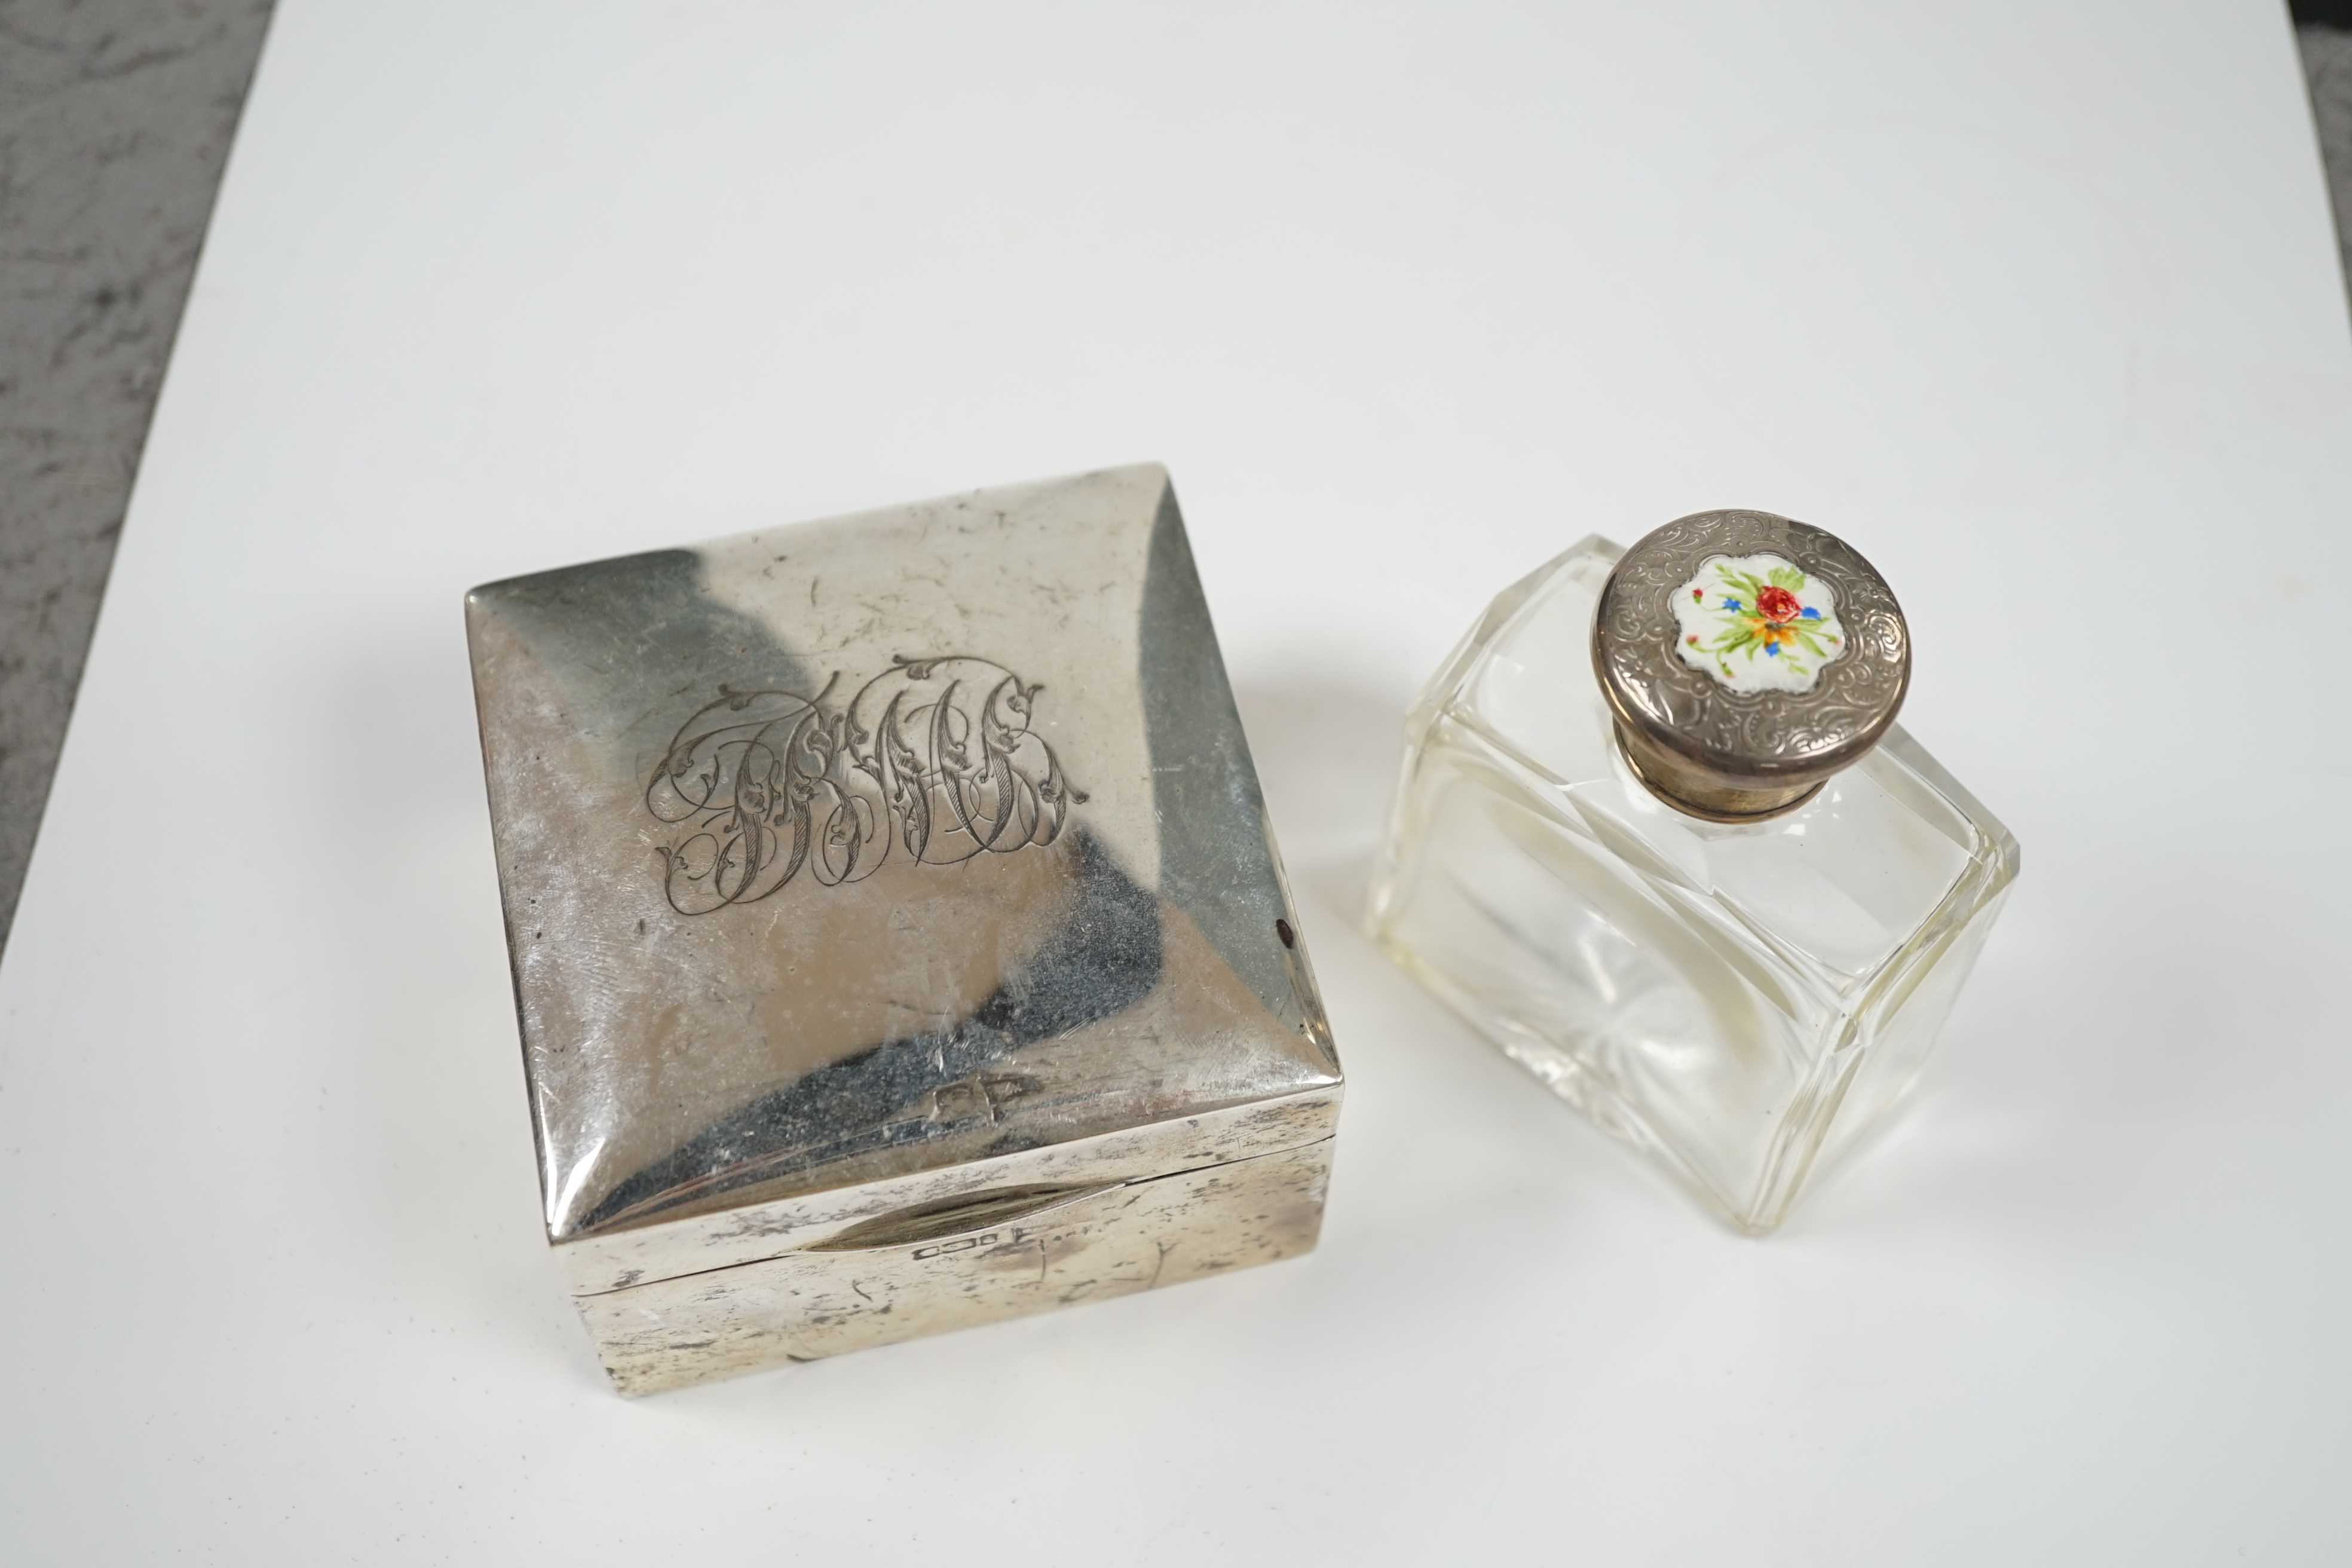 An Edwardian silver mounted cigarette box, marks rubbed, 90mm, together with a white metal and enamel topped glass scent bottle. Condition - poor